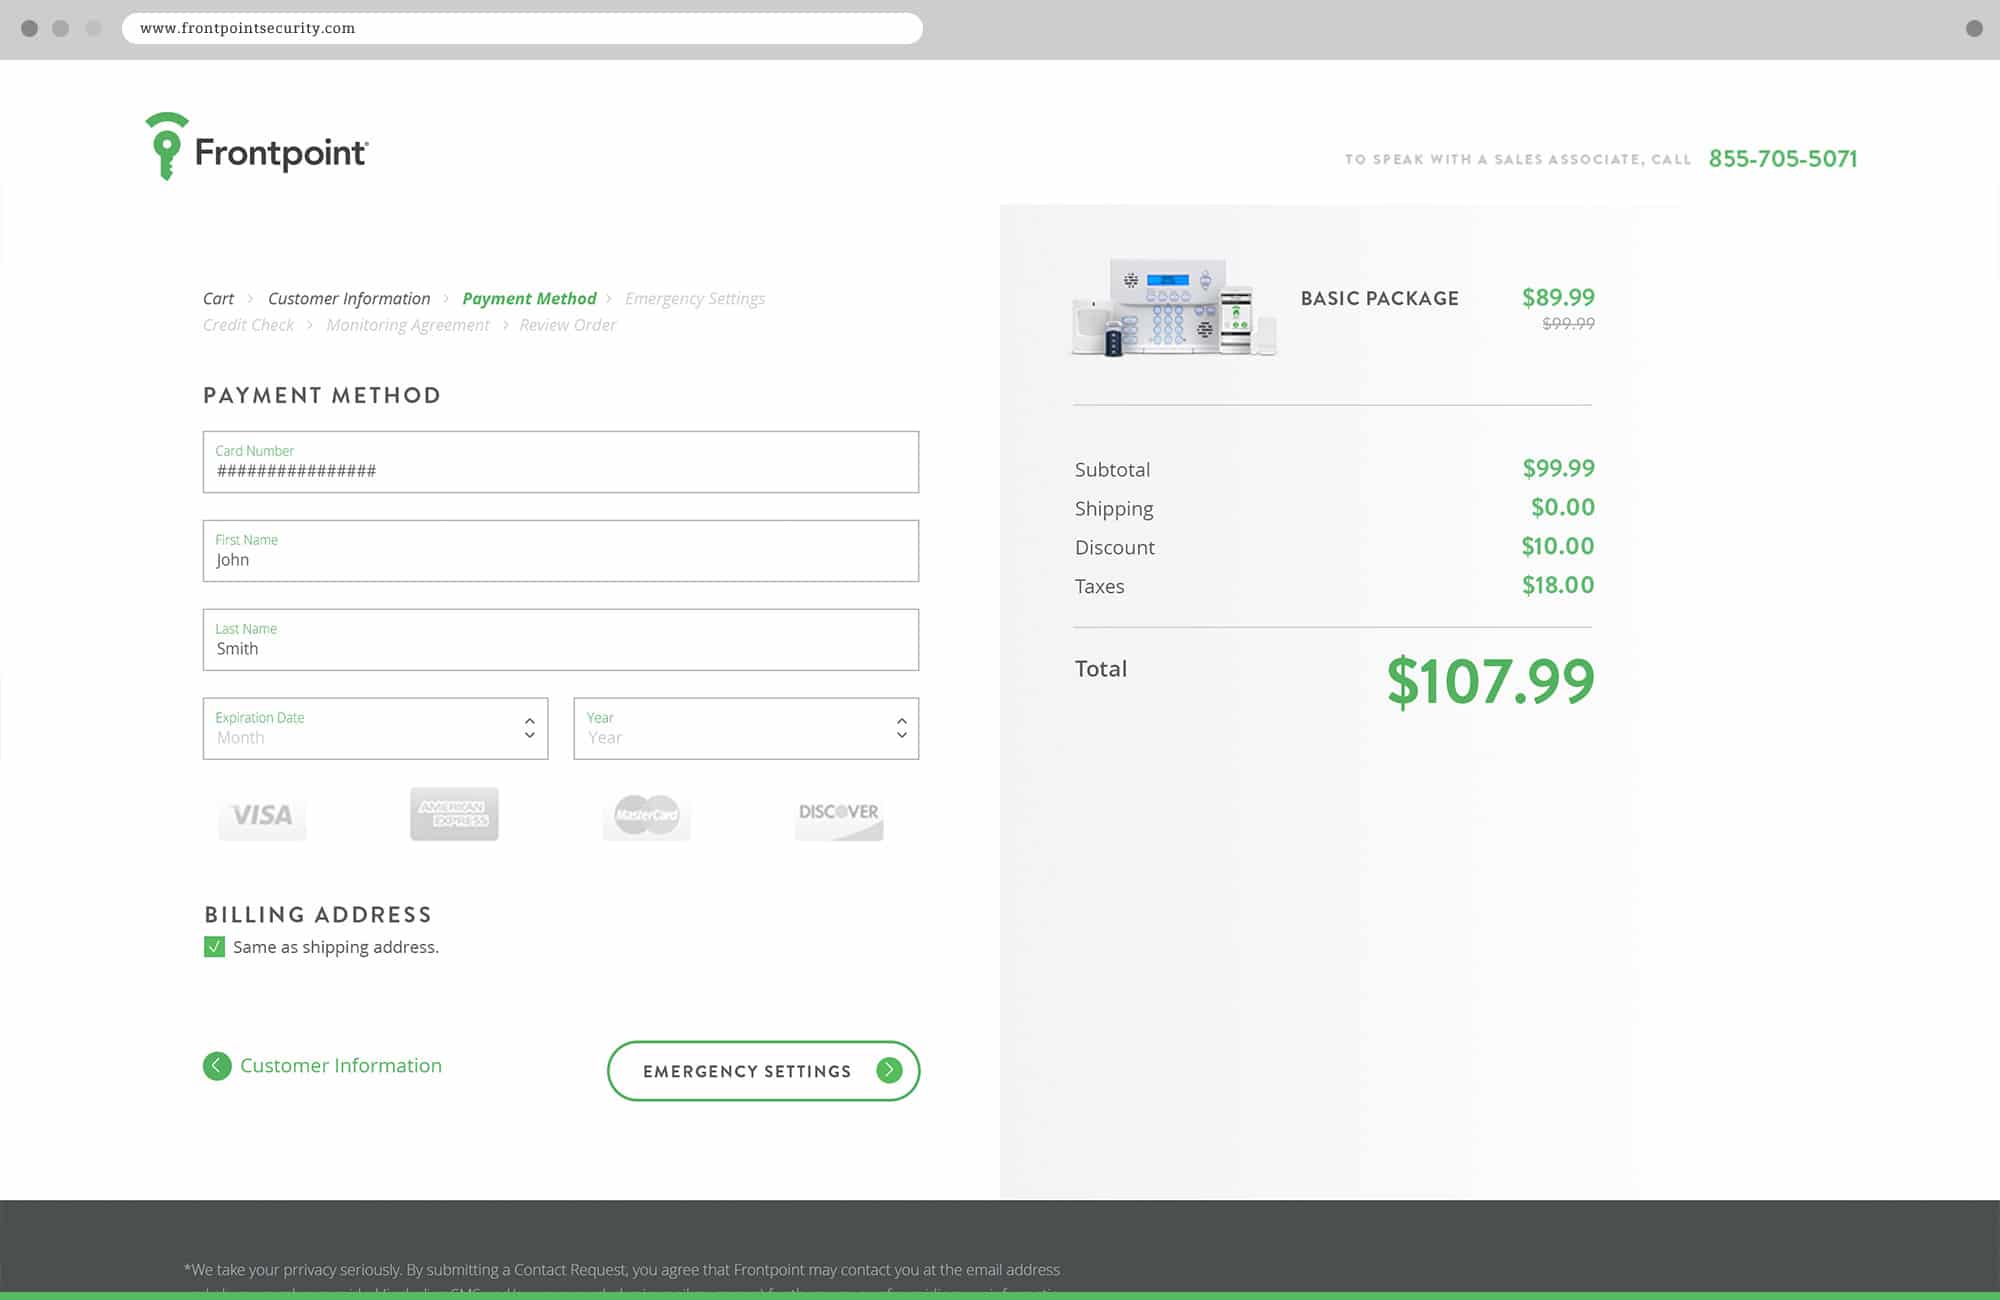 Punch -Frontpoint Checkout Screen